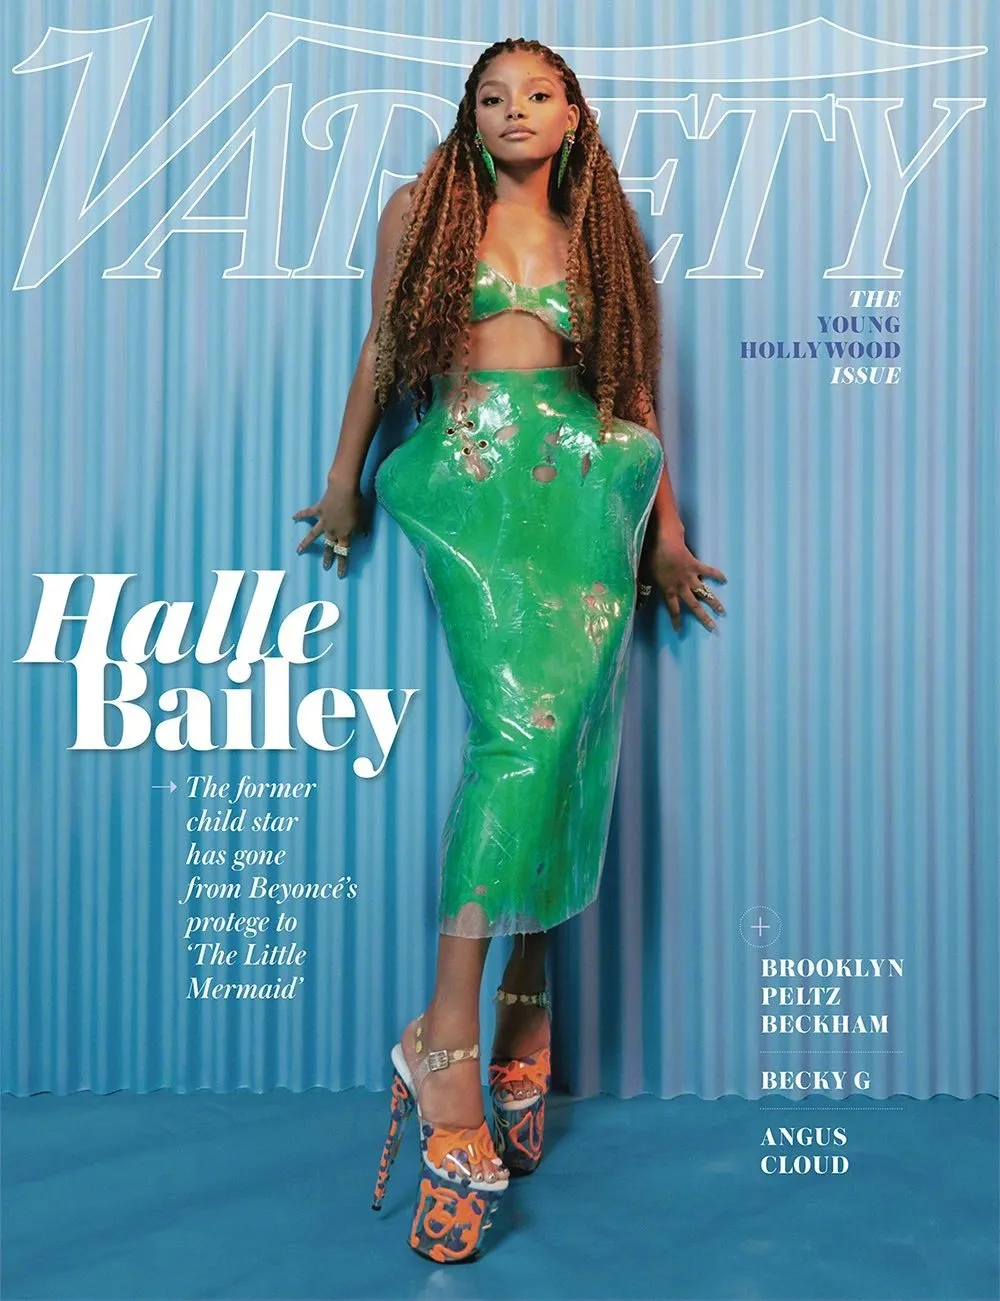 Halle Bailey, new photo for 'Variety' magazine "Power of Young Hollywood" special issue | FMV6